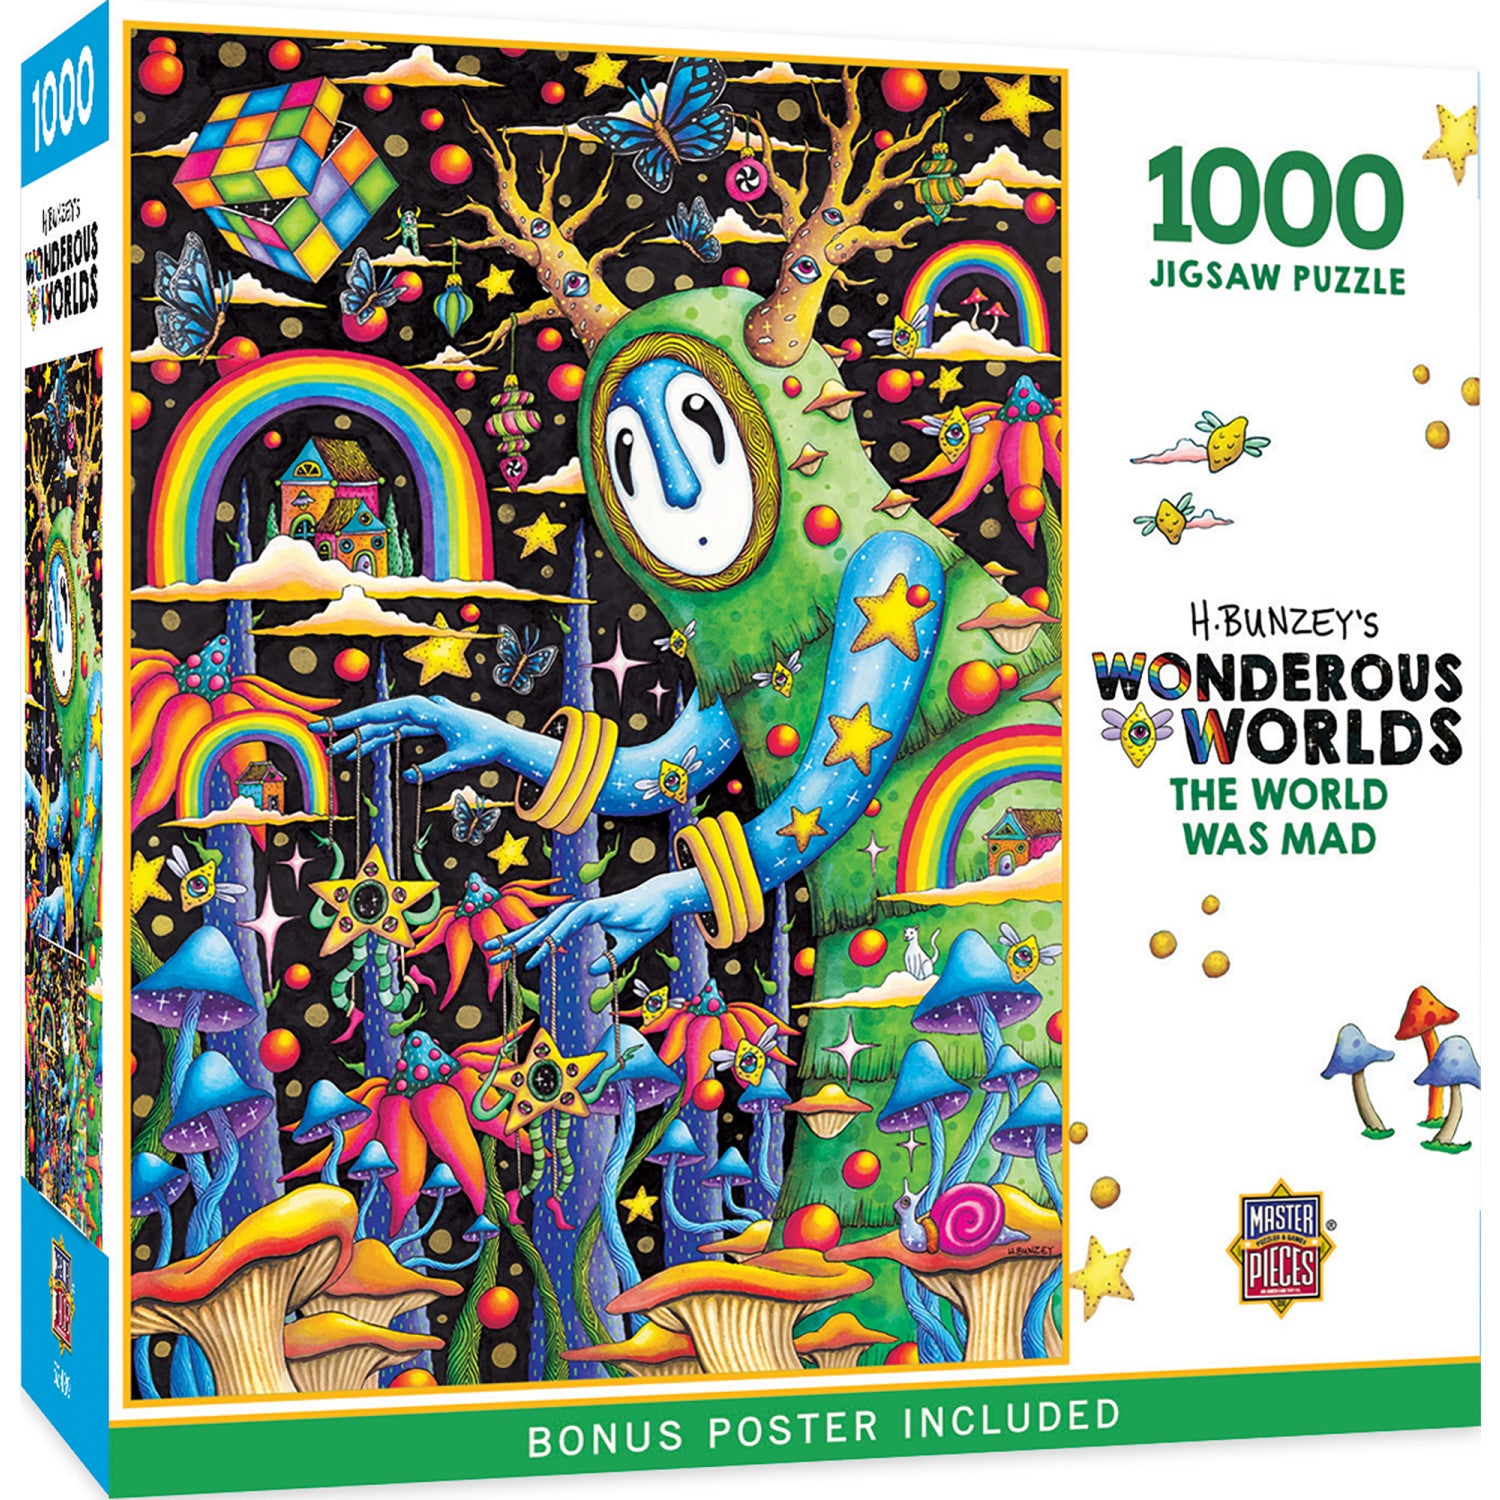 Wonderous Worlds - The World Was Mad 1000 Piece Jigsaw Puzzle